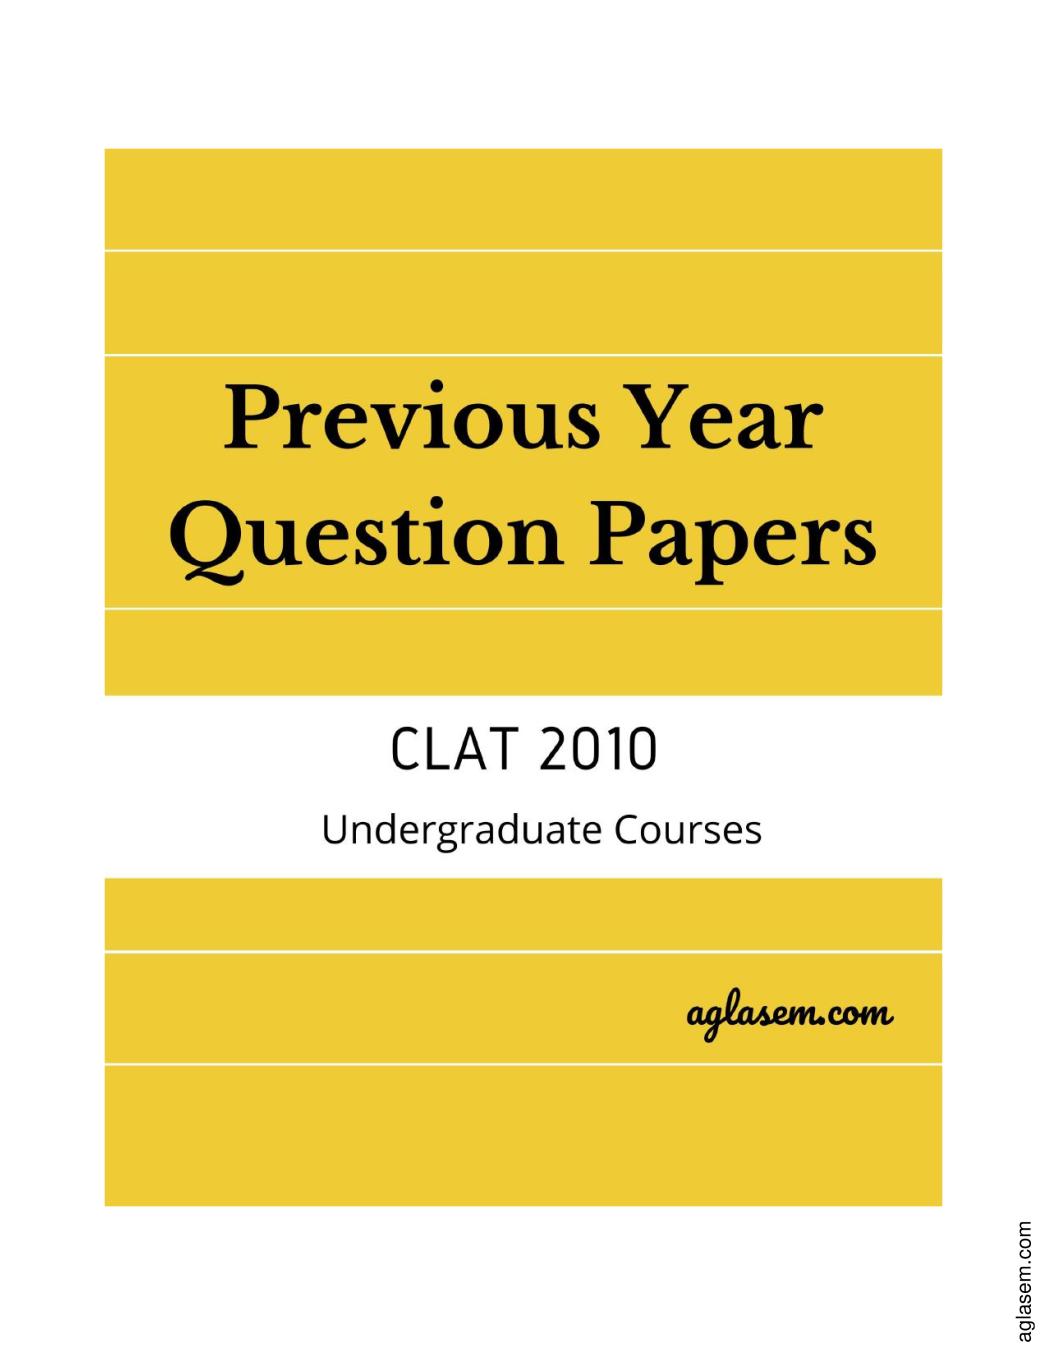 CLAT 2010 Question Paper - Page 1